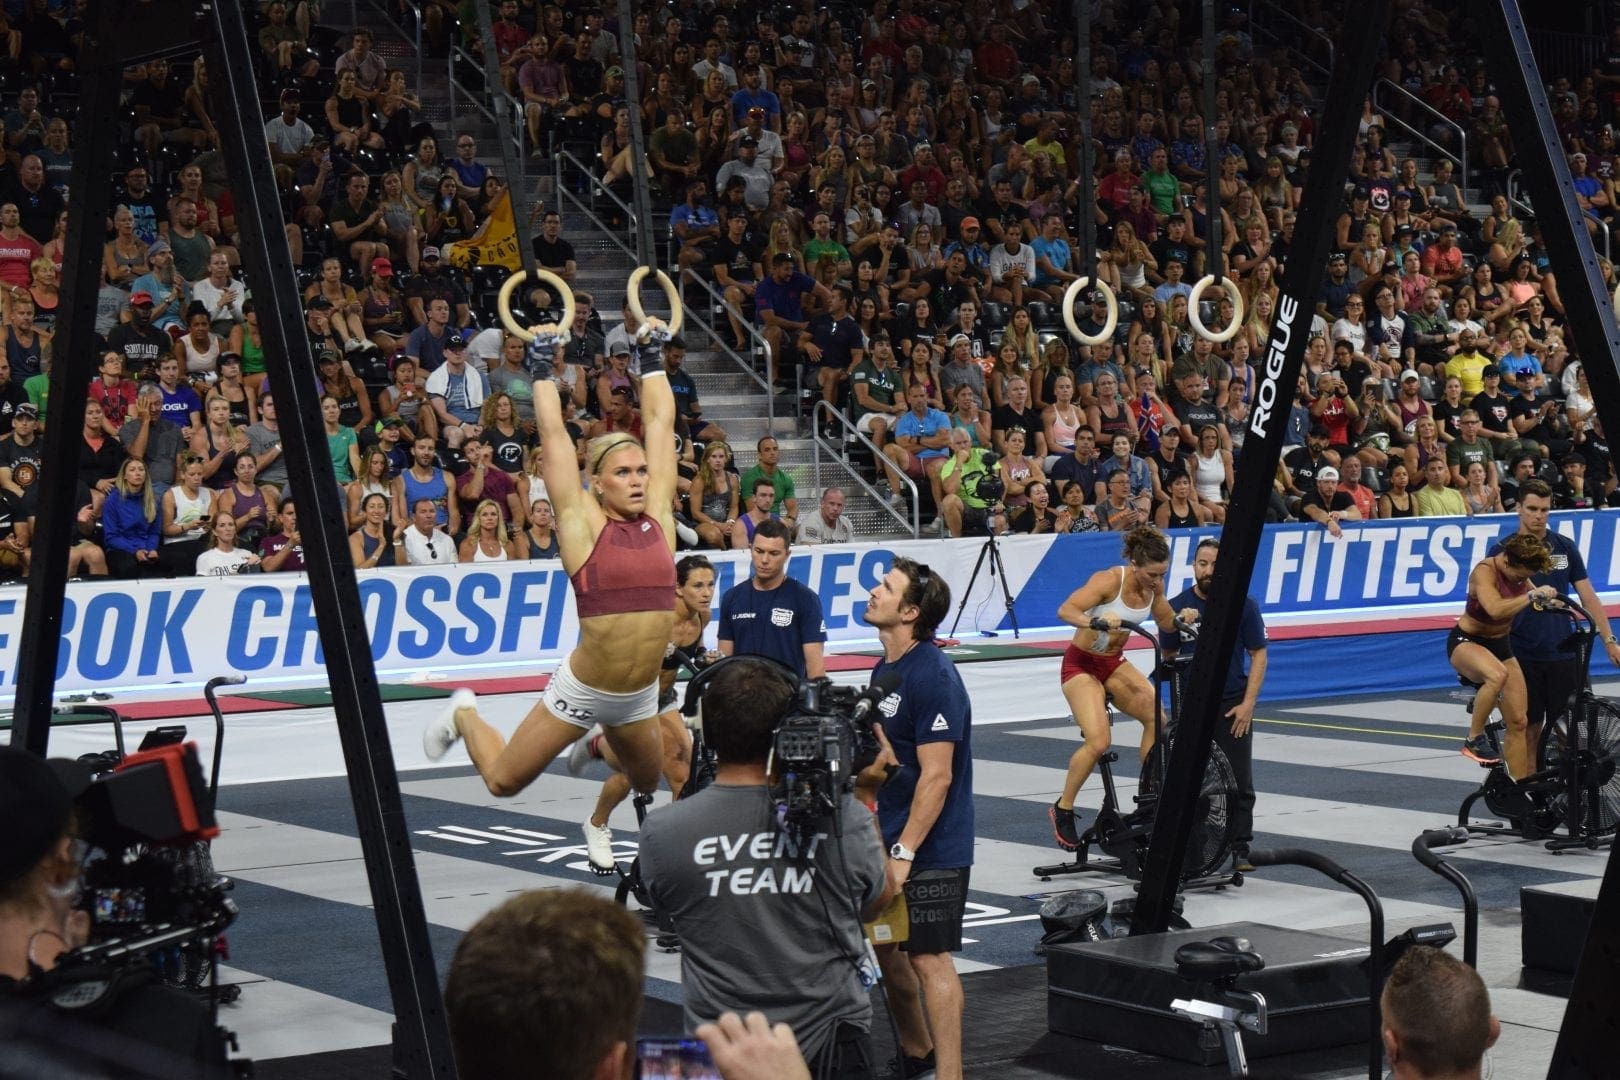 Katrin Davidsdottir on rings in the coliseum completing toes-to-rings in the 2019 CrossFit Games.